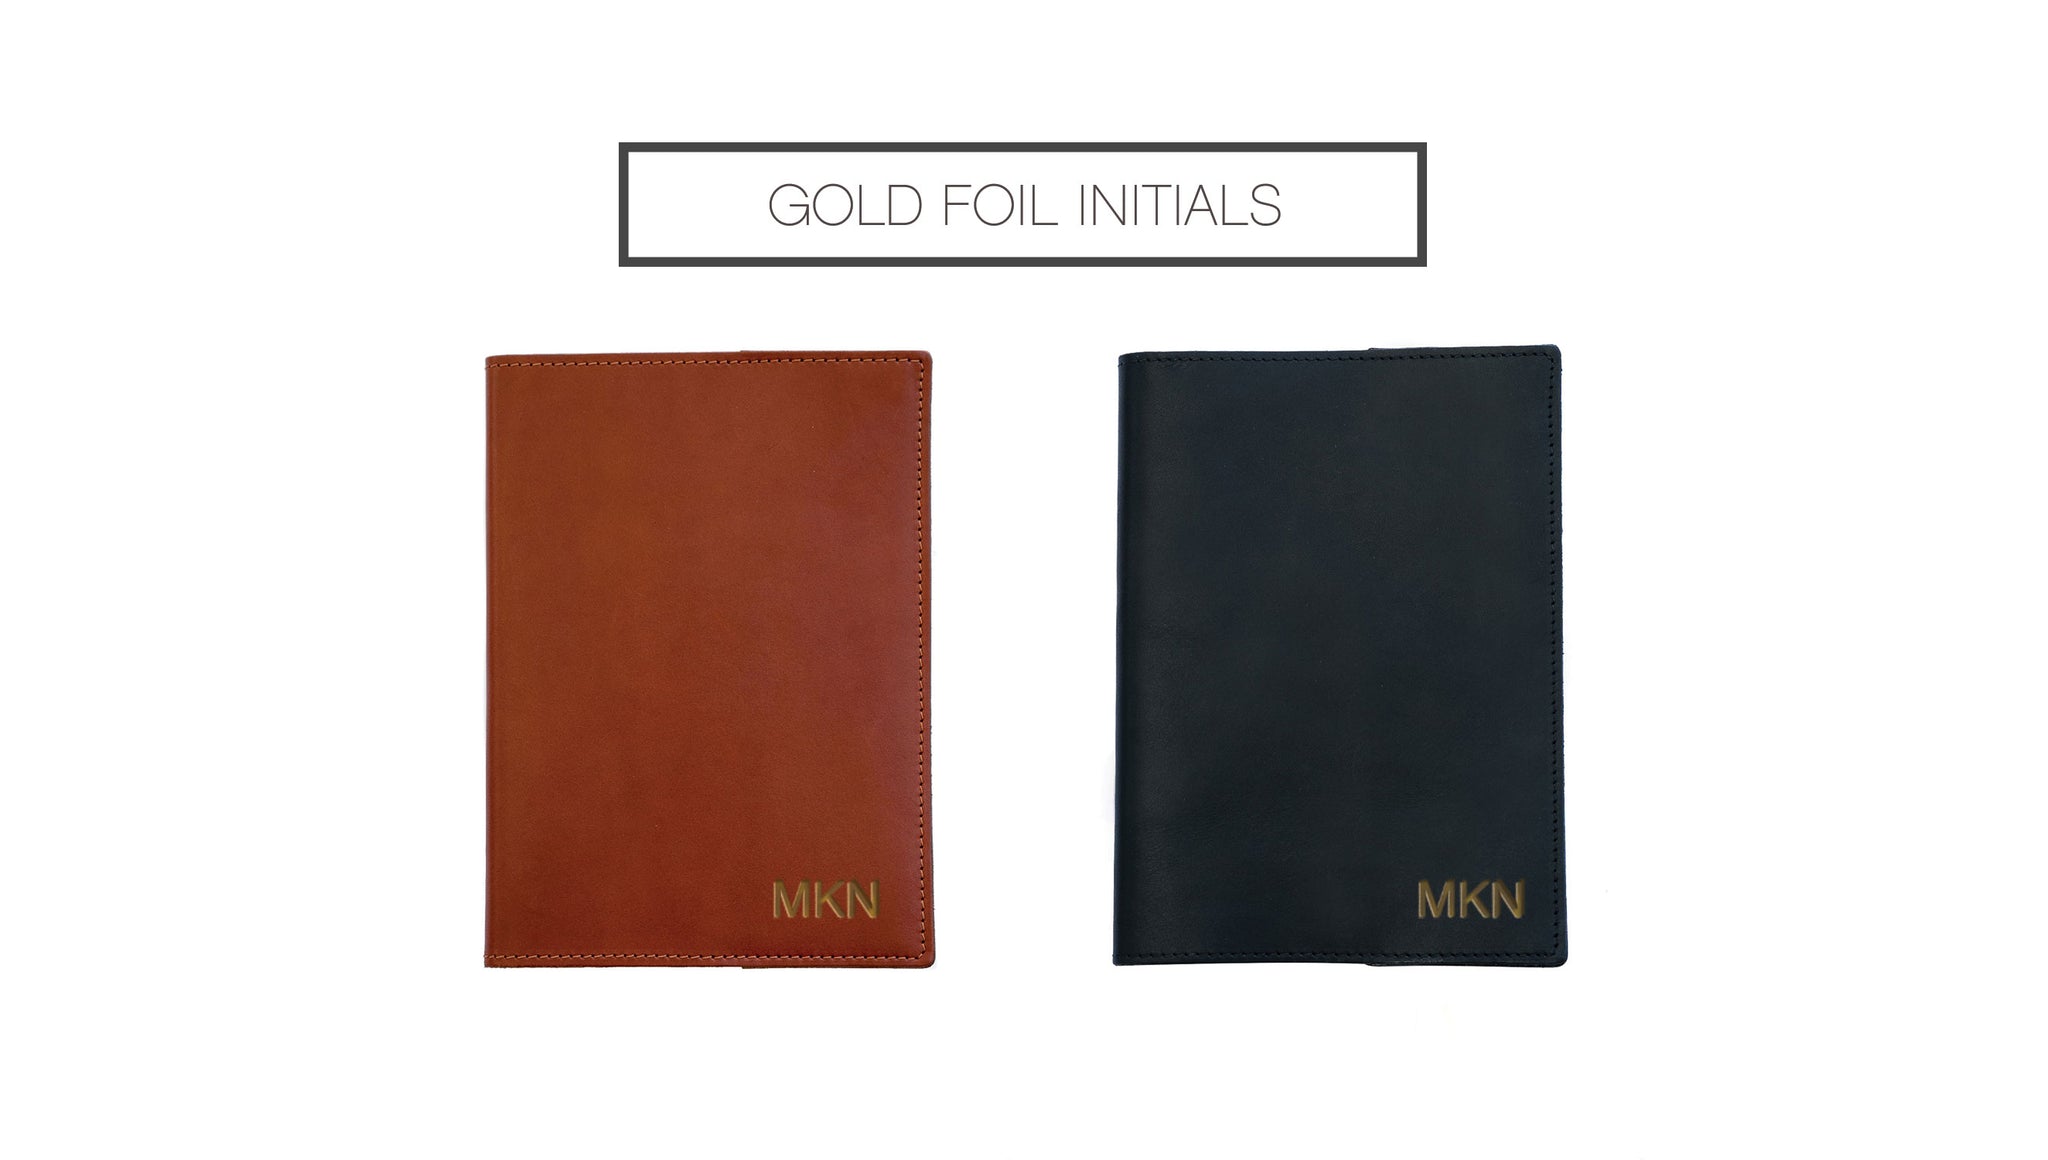 FOTO's genuine leather journal can be personalized with gold foil initials. Initials must be entered in the exact order you would like them to appear on the journal.